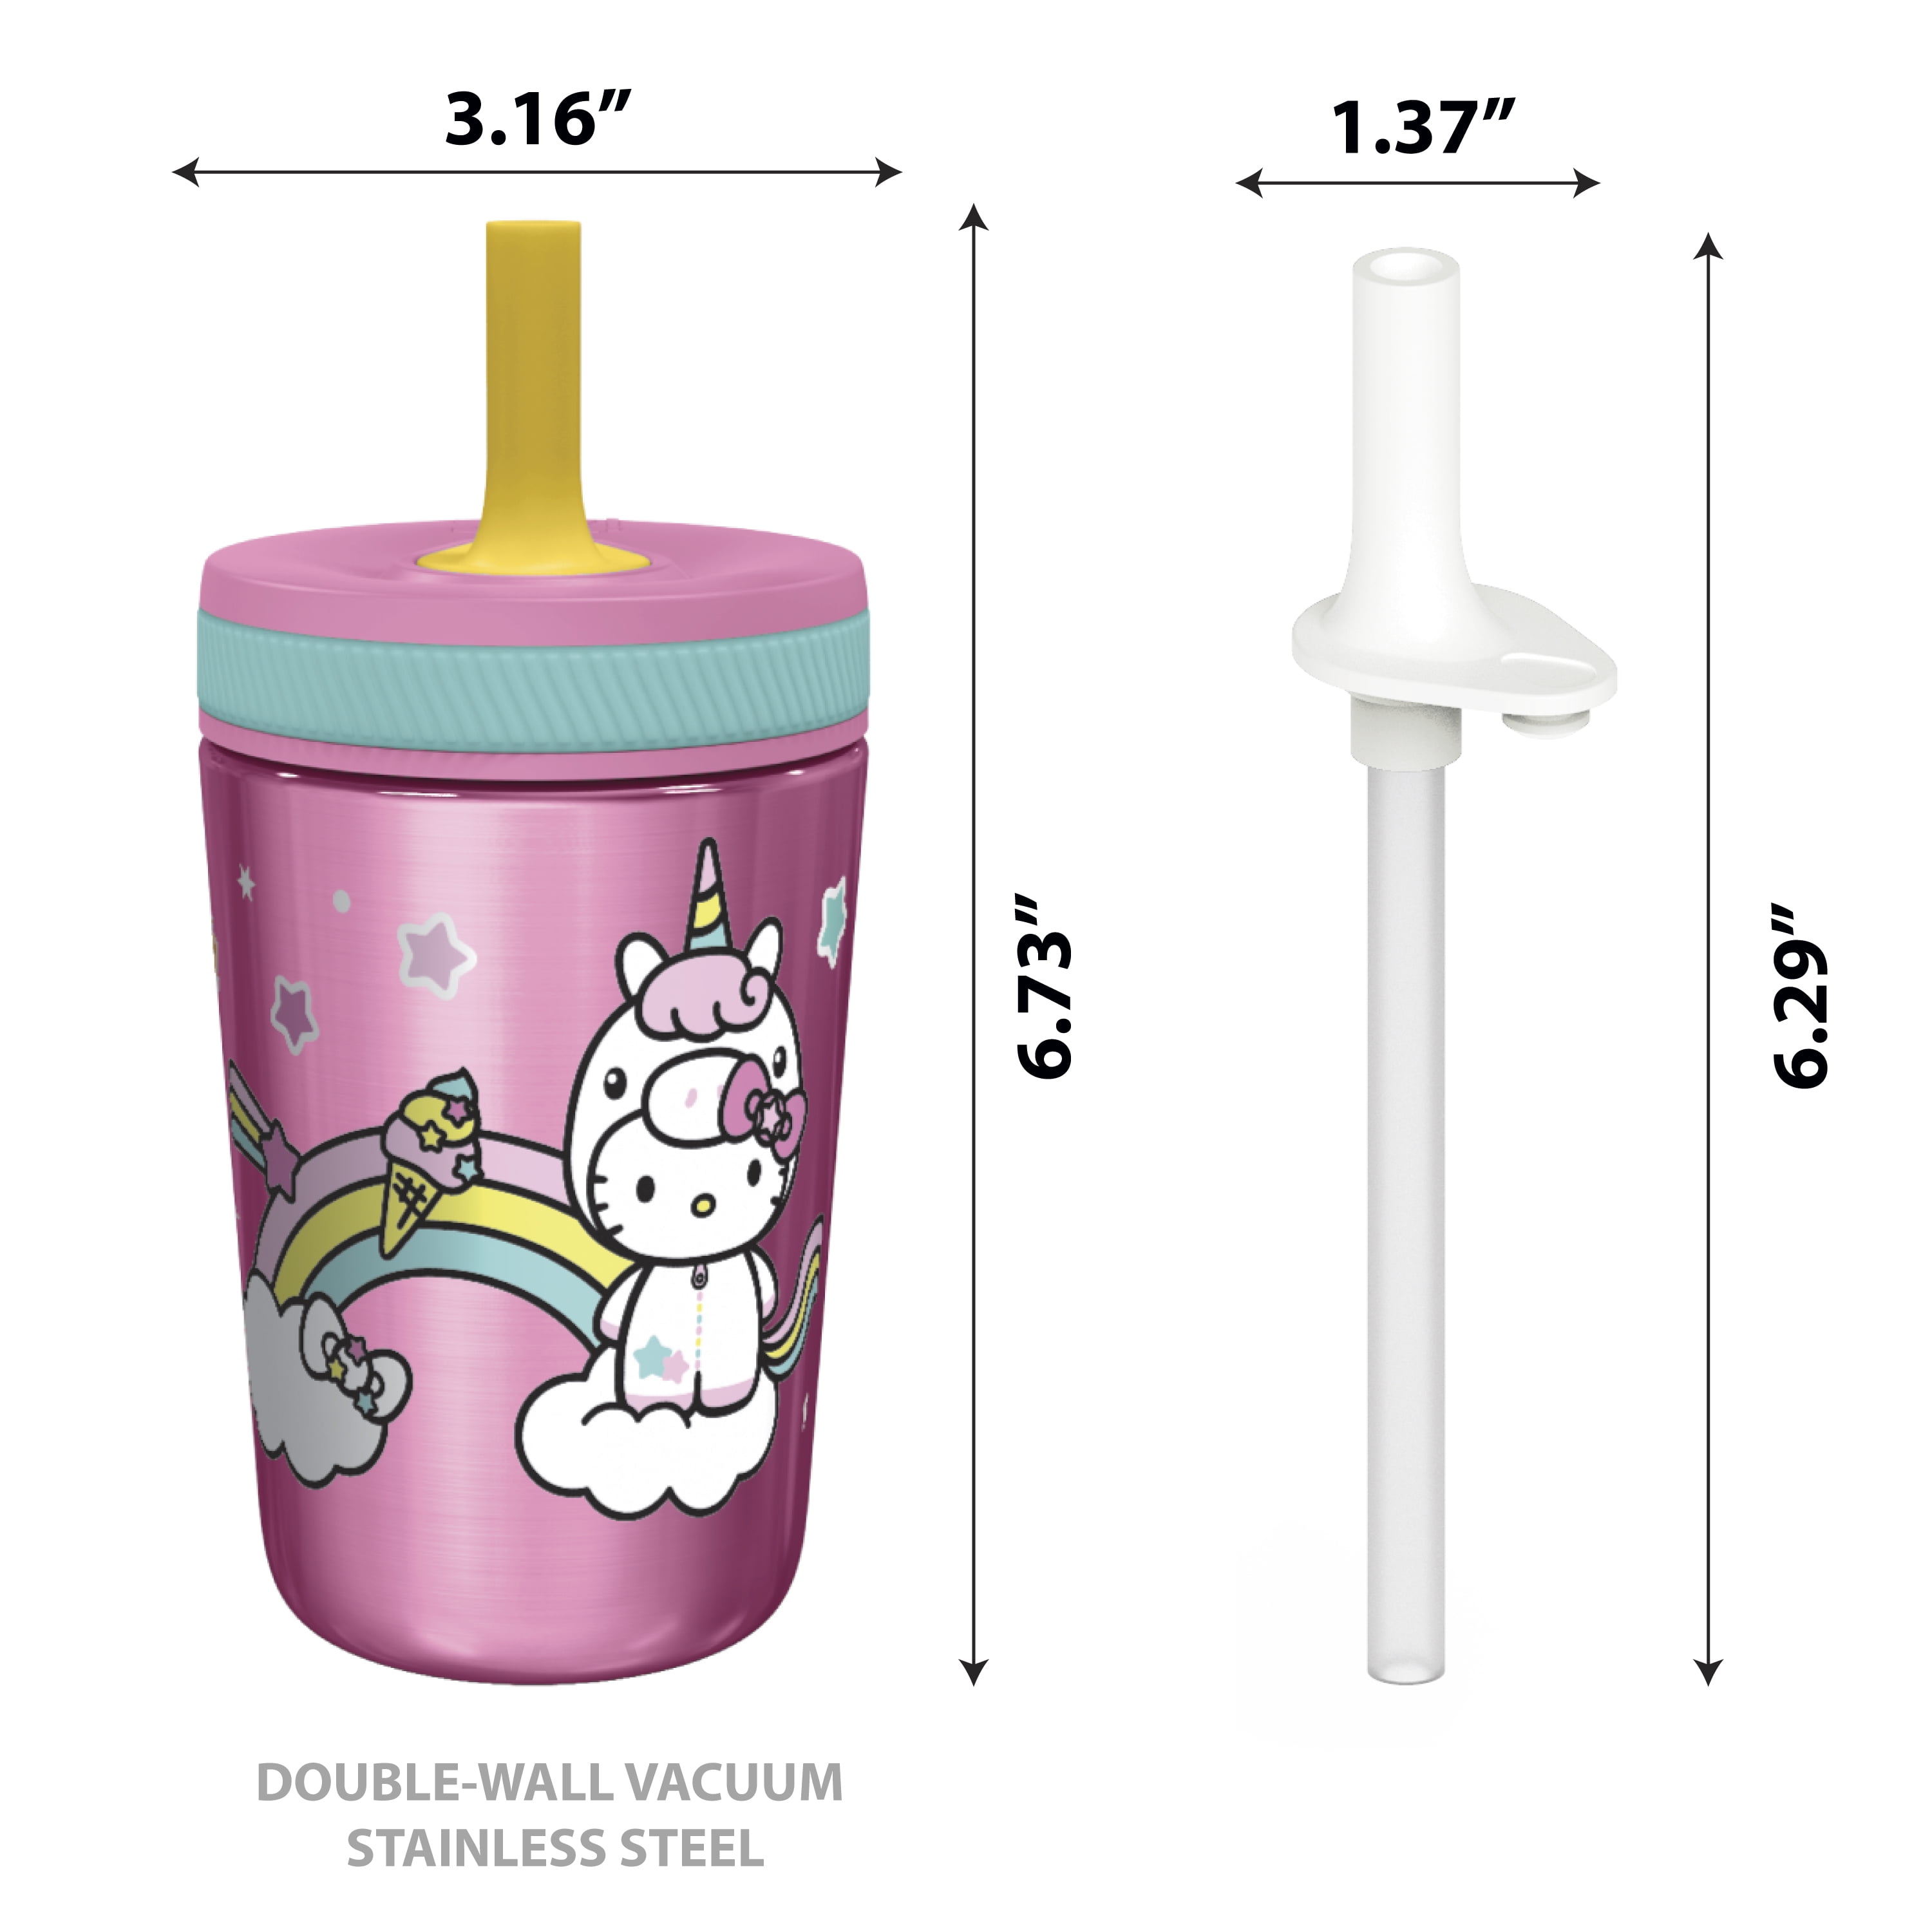 Zak Designs 15oz Hello Kitty Kelso Tumbler Set, BPA-Free Leak-Proof Screw-On Lid with Straw Made of Durable Plastic and Silicone, Perfect Bundle for